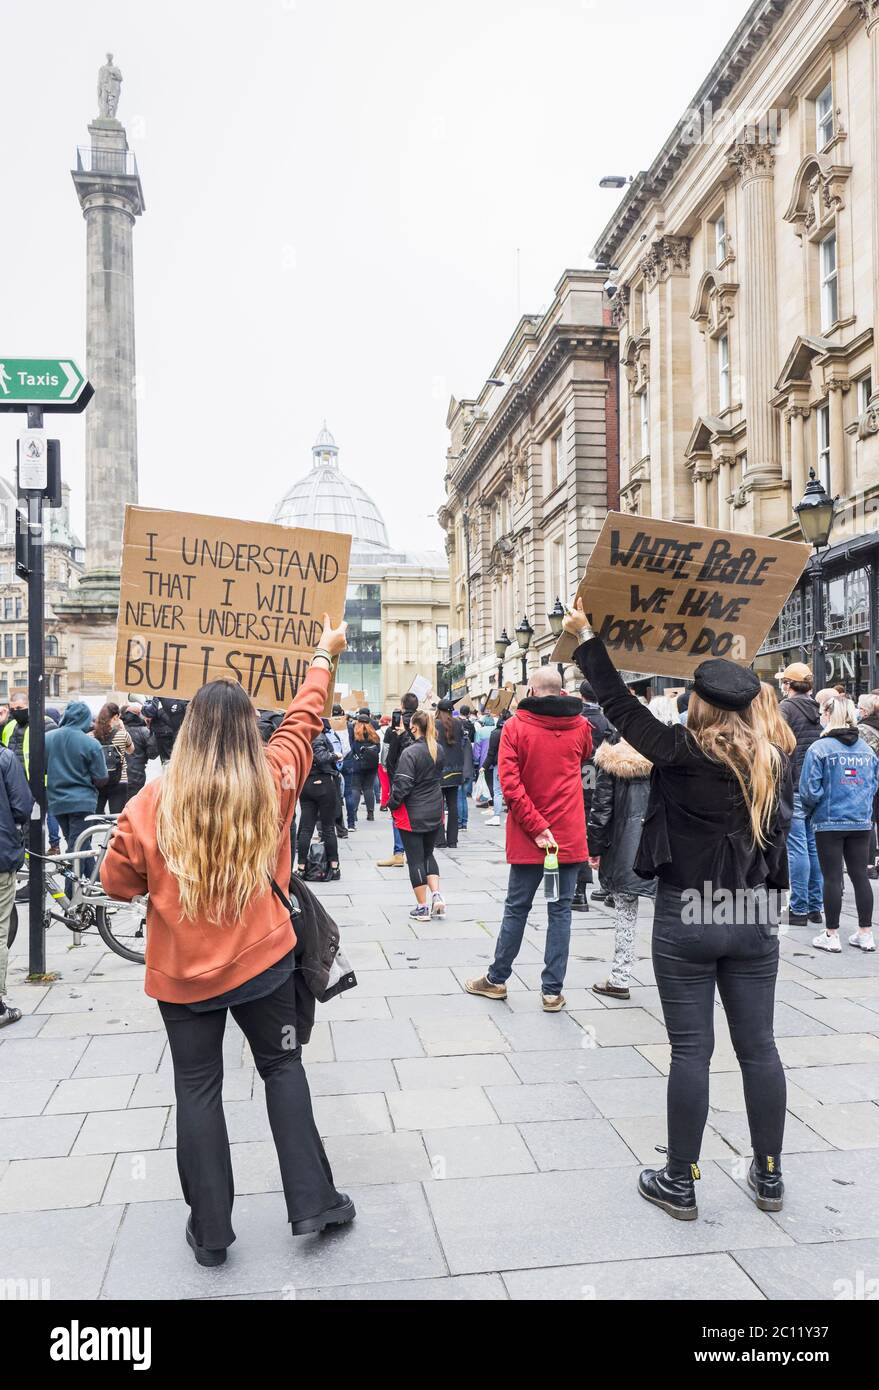 Newcastle upon Tyne, UK. 13th June 2020. Protest by international human rights movement Black Lives Matter following the death of George Floyd in Minneapolis Minnesota on 25th May 2020. Joseph Gaul/Alamy News. Stock Photo